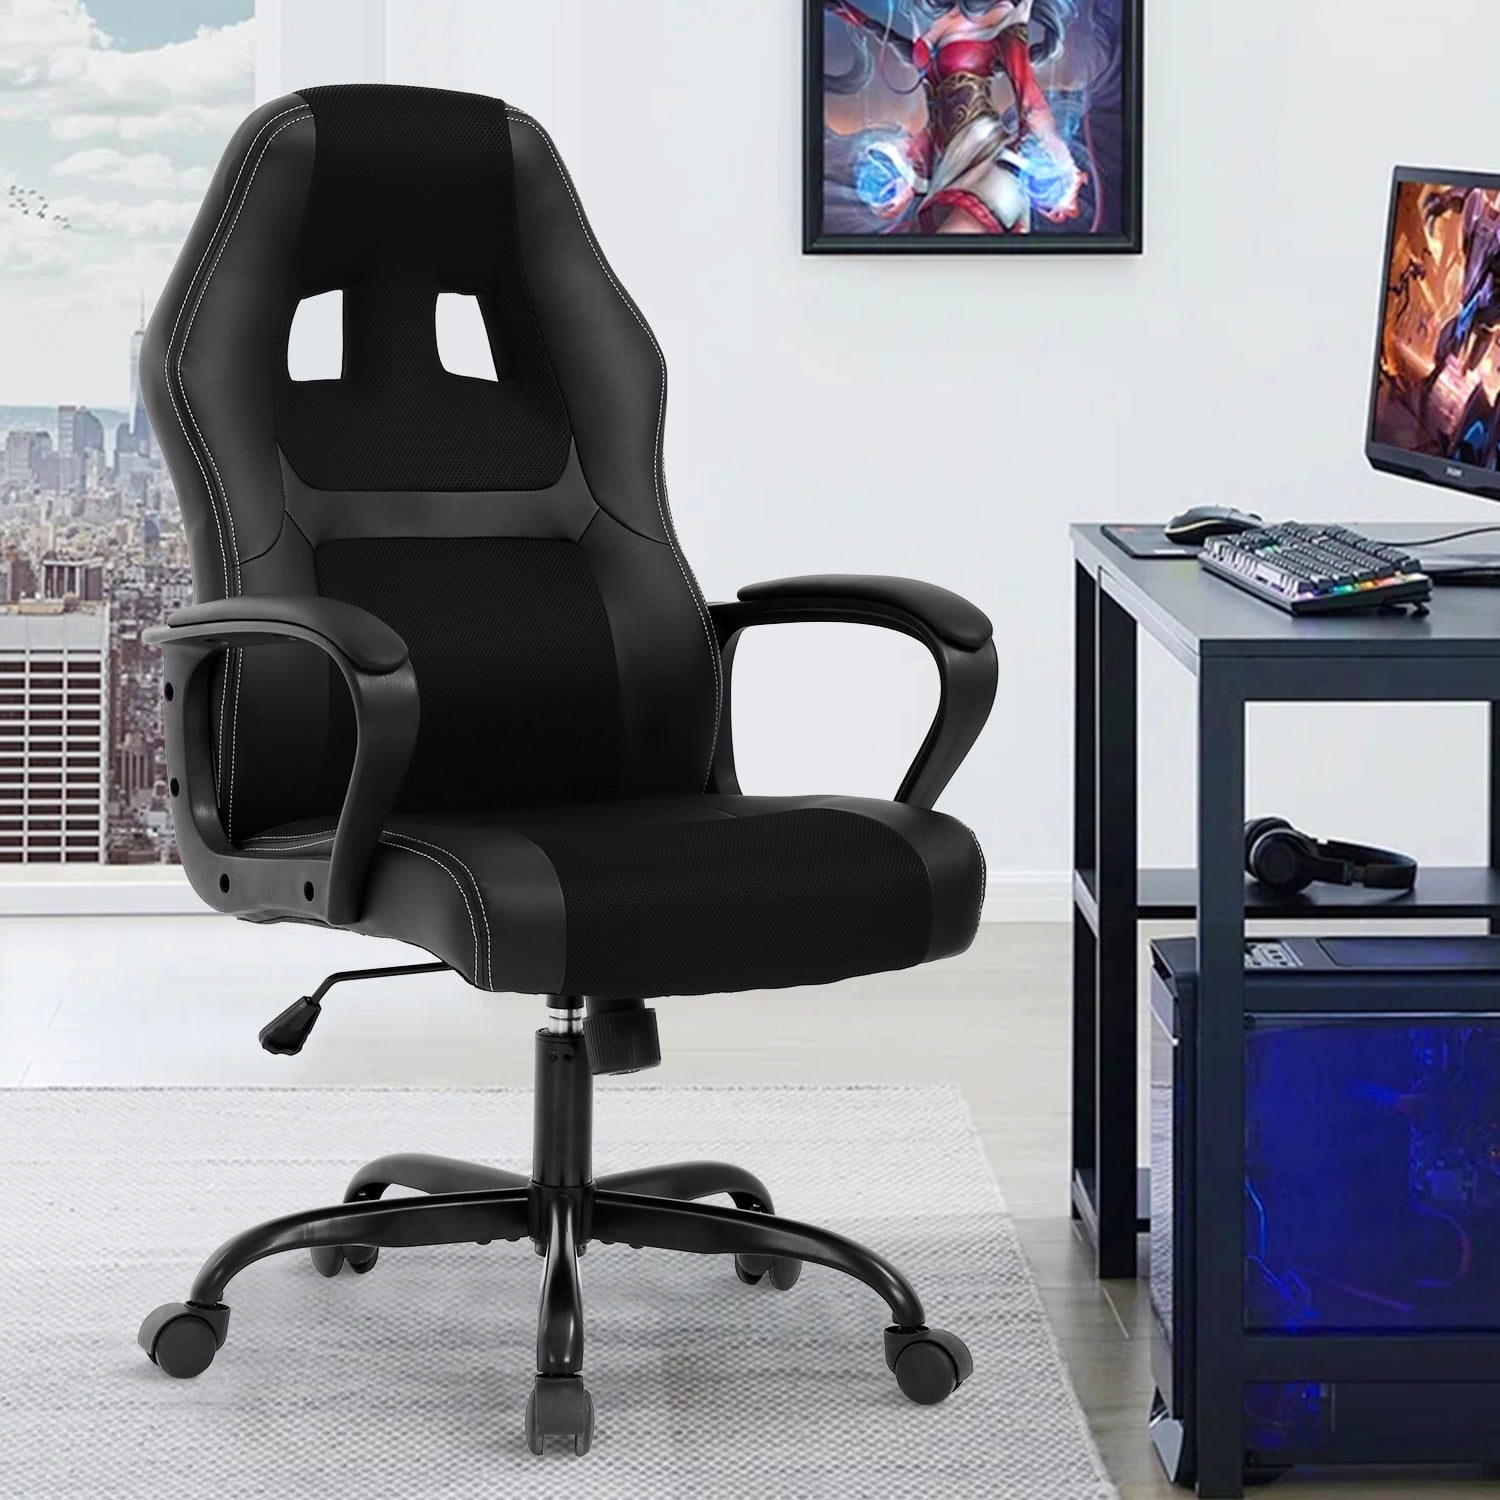 PC Gaming Chair Ergonomic Office Chair 250LBS Desk Chair with Lumbar ...